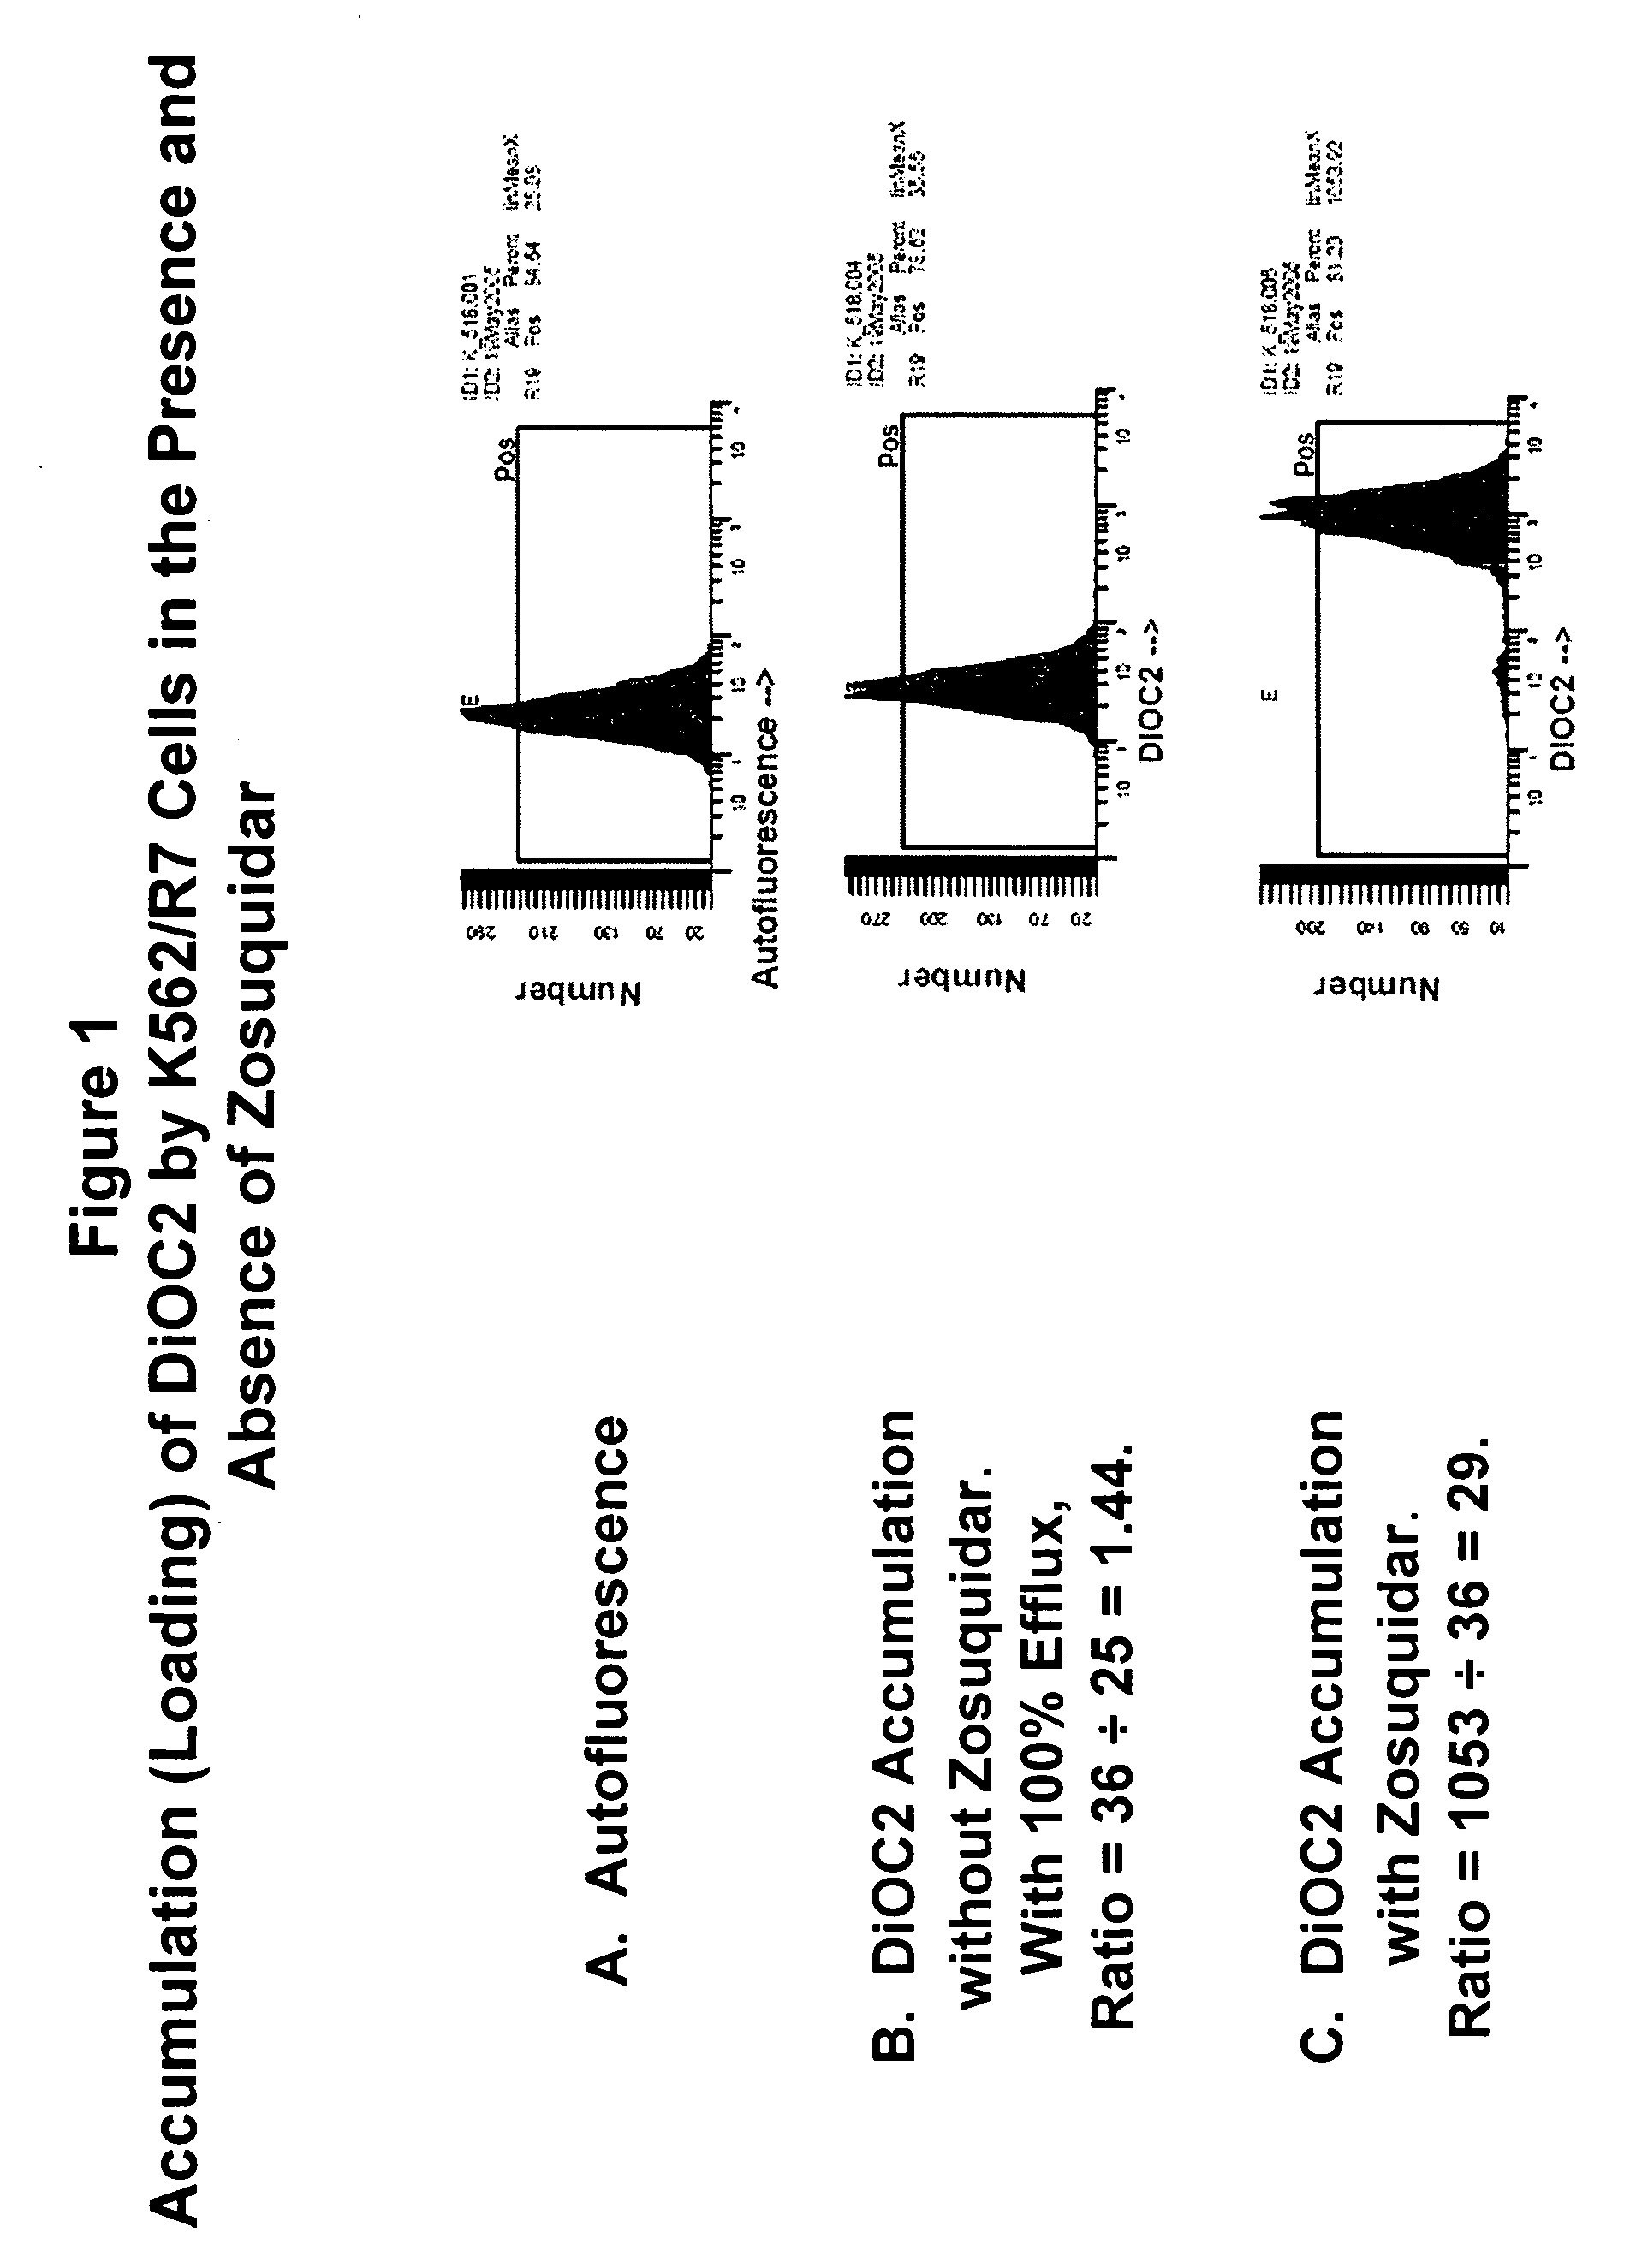 Treatment of cancer patients exhibiting activation of the P-glycoprotein efflux pump mechanism